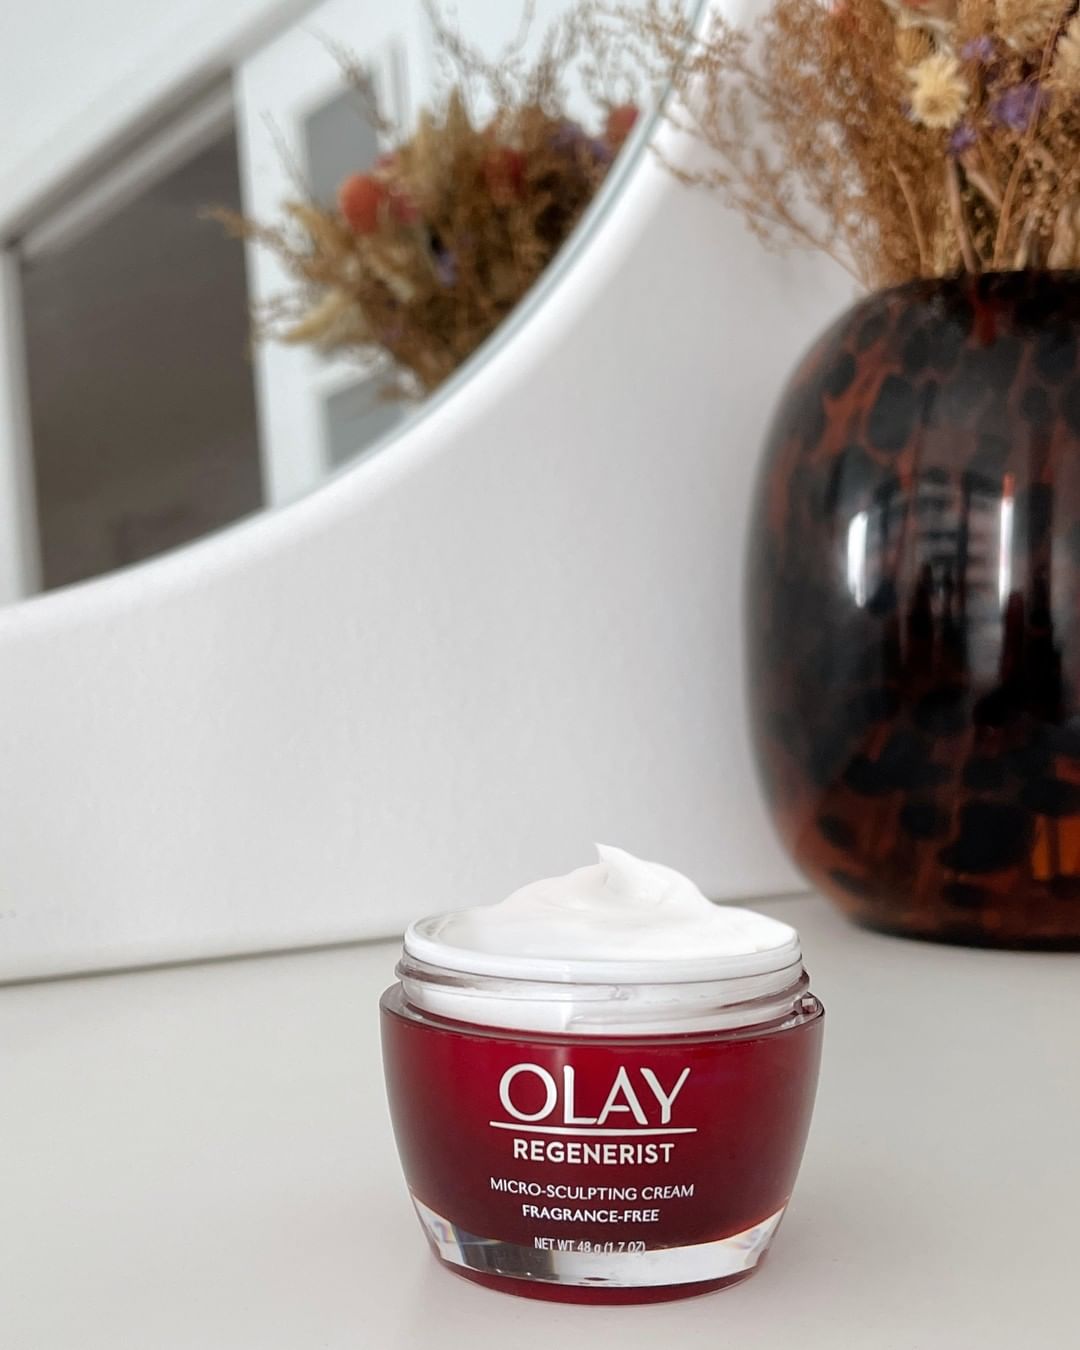 Is Olay A Good Skin Care Brand